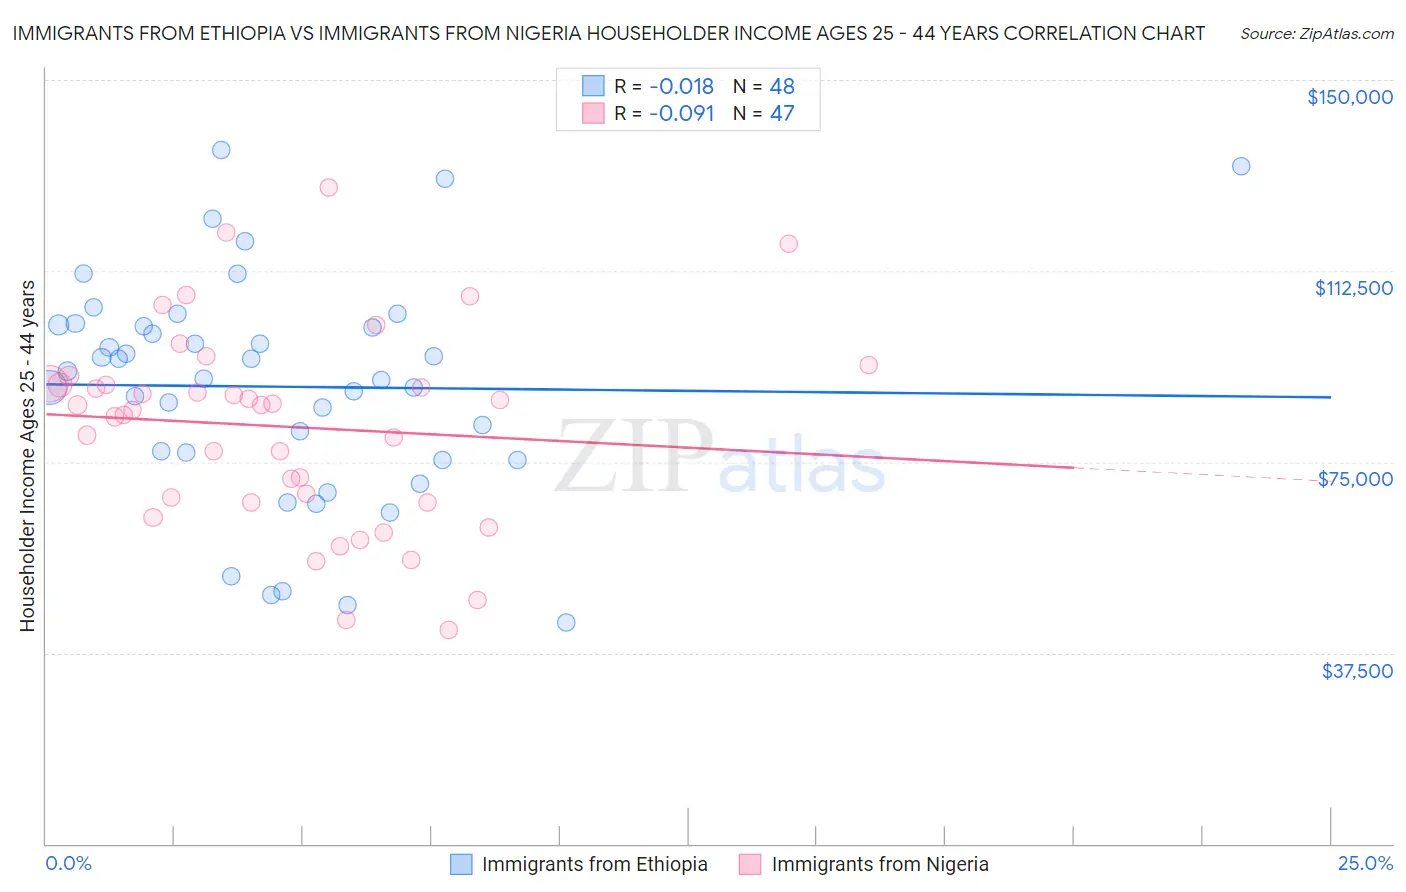 Immigrants from Ethiopia vs Immigrants from Nigeria Householder Income Ages 25 - 44 years